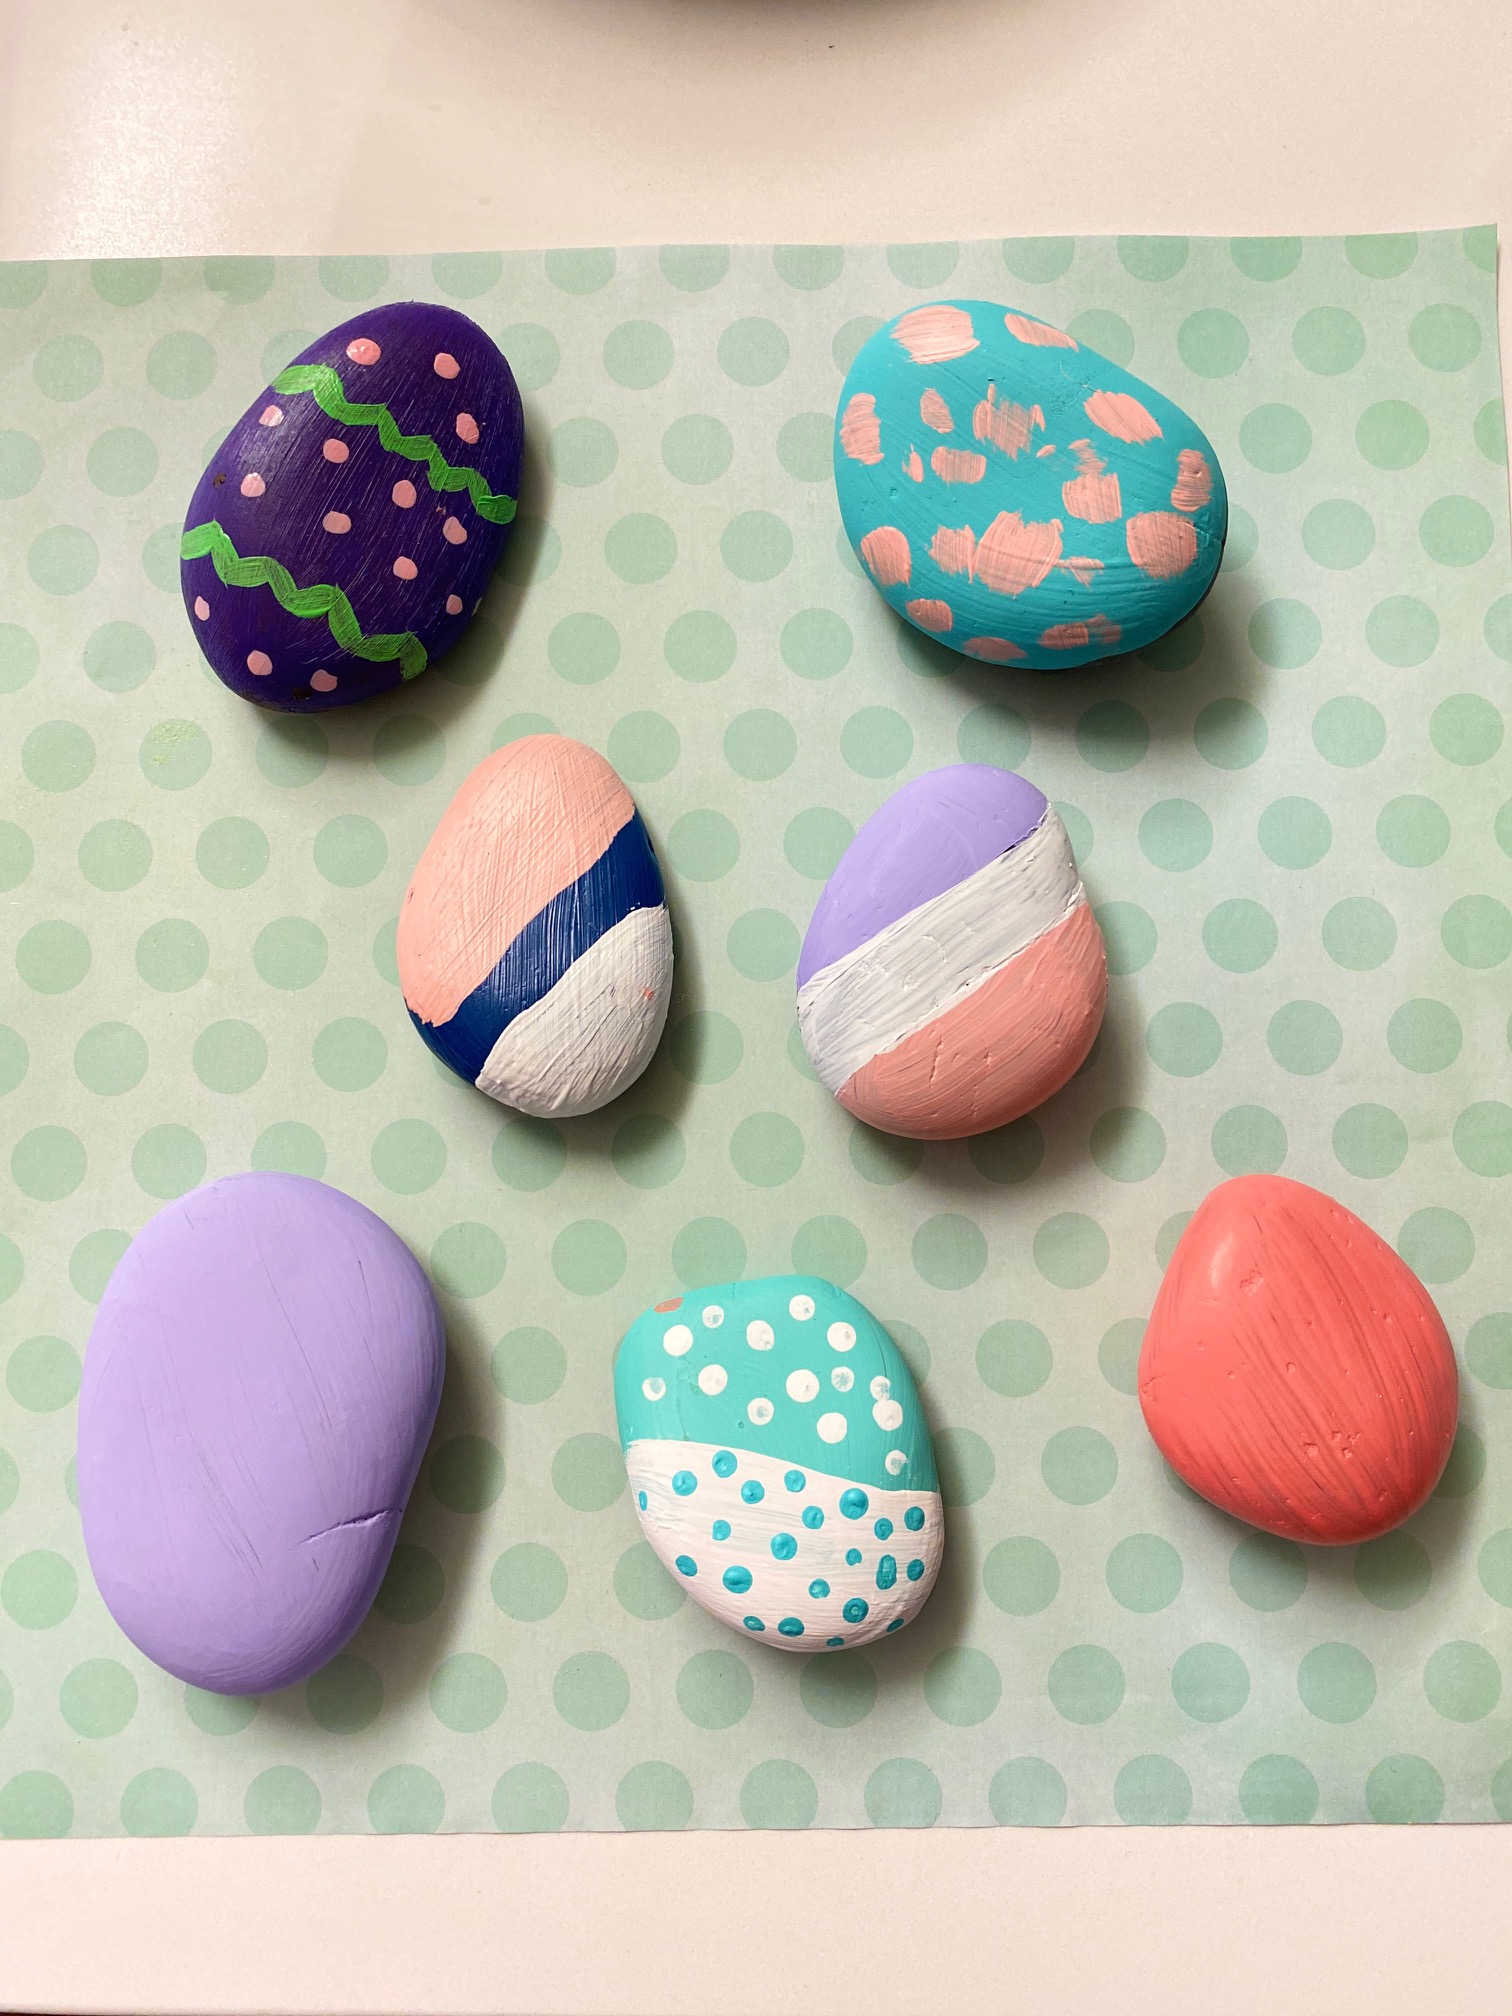 PHOTO:Oval-shaped rocks for Easter